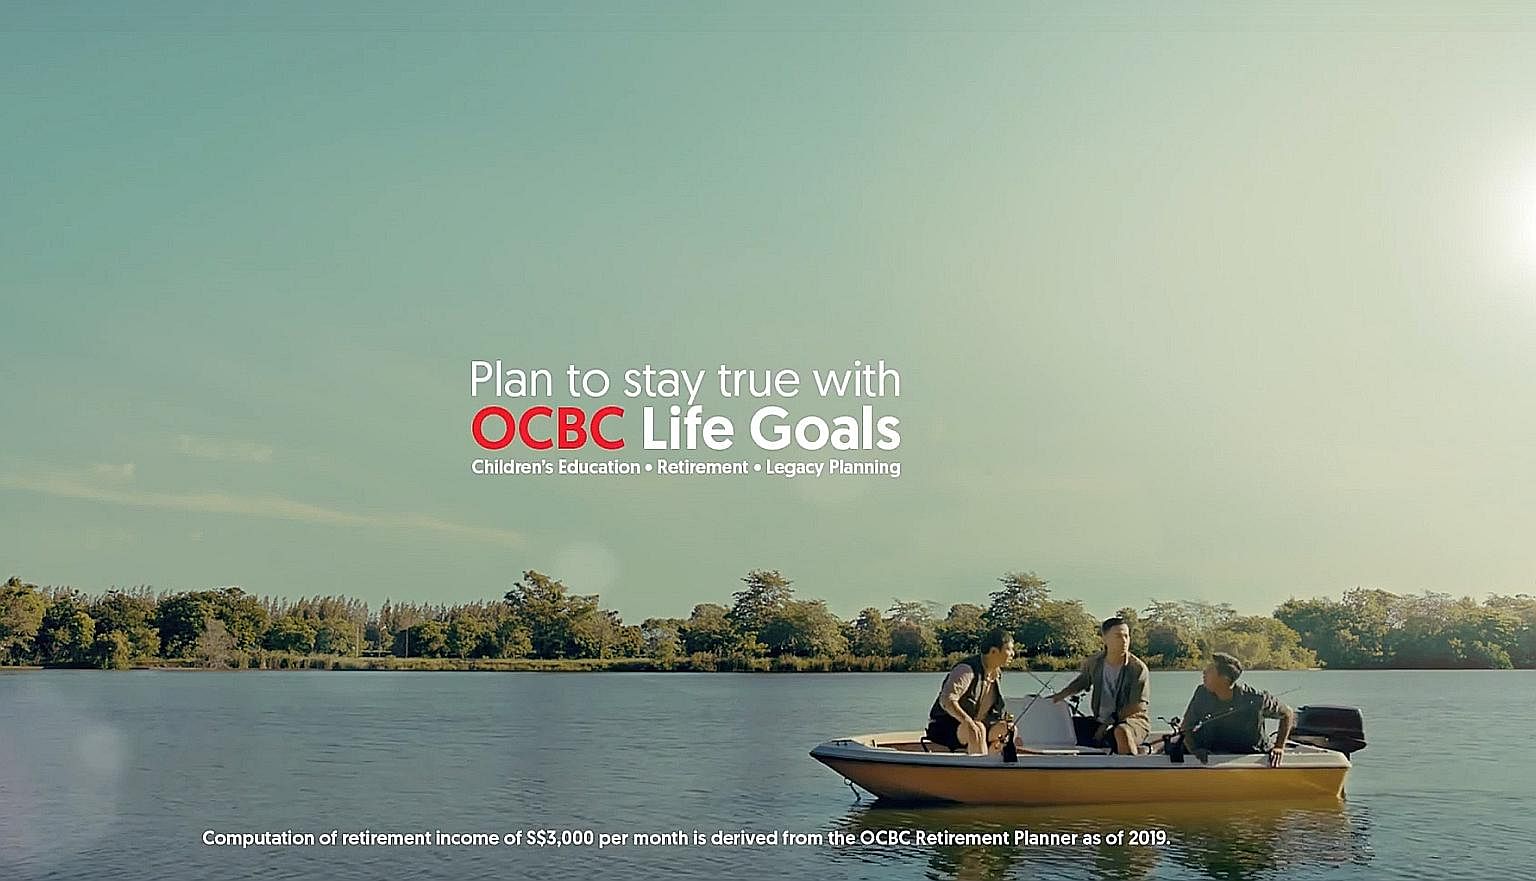 OCBC uses a tongue-in-cheek video of three friends who want to go fishing around the world to get people to think hard about retirement planning. The message is a bold one as it makes people wonder how they can retire happily if they don't have over 